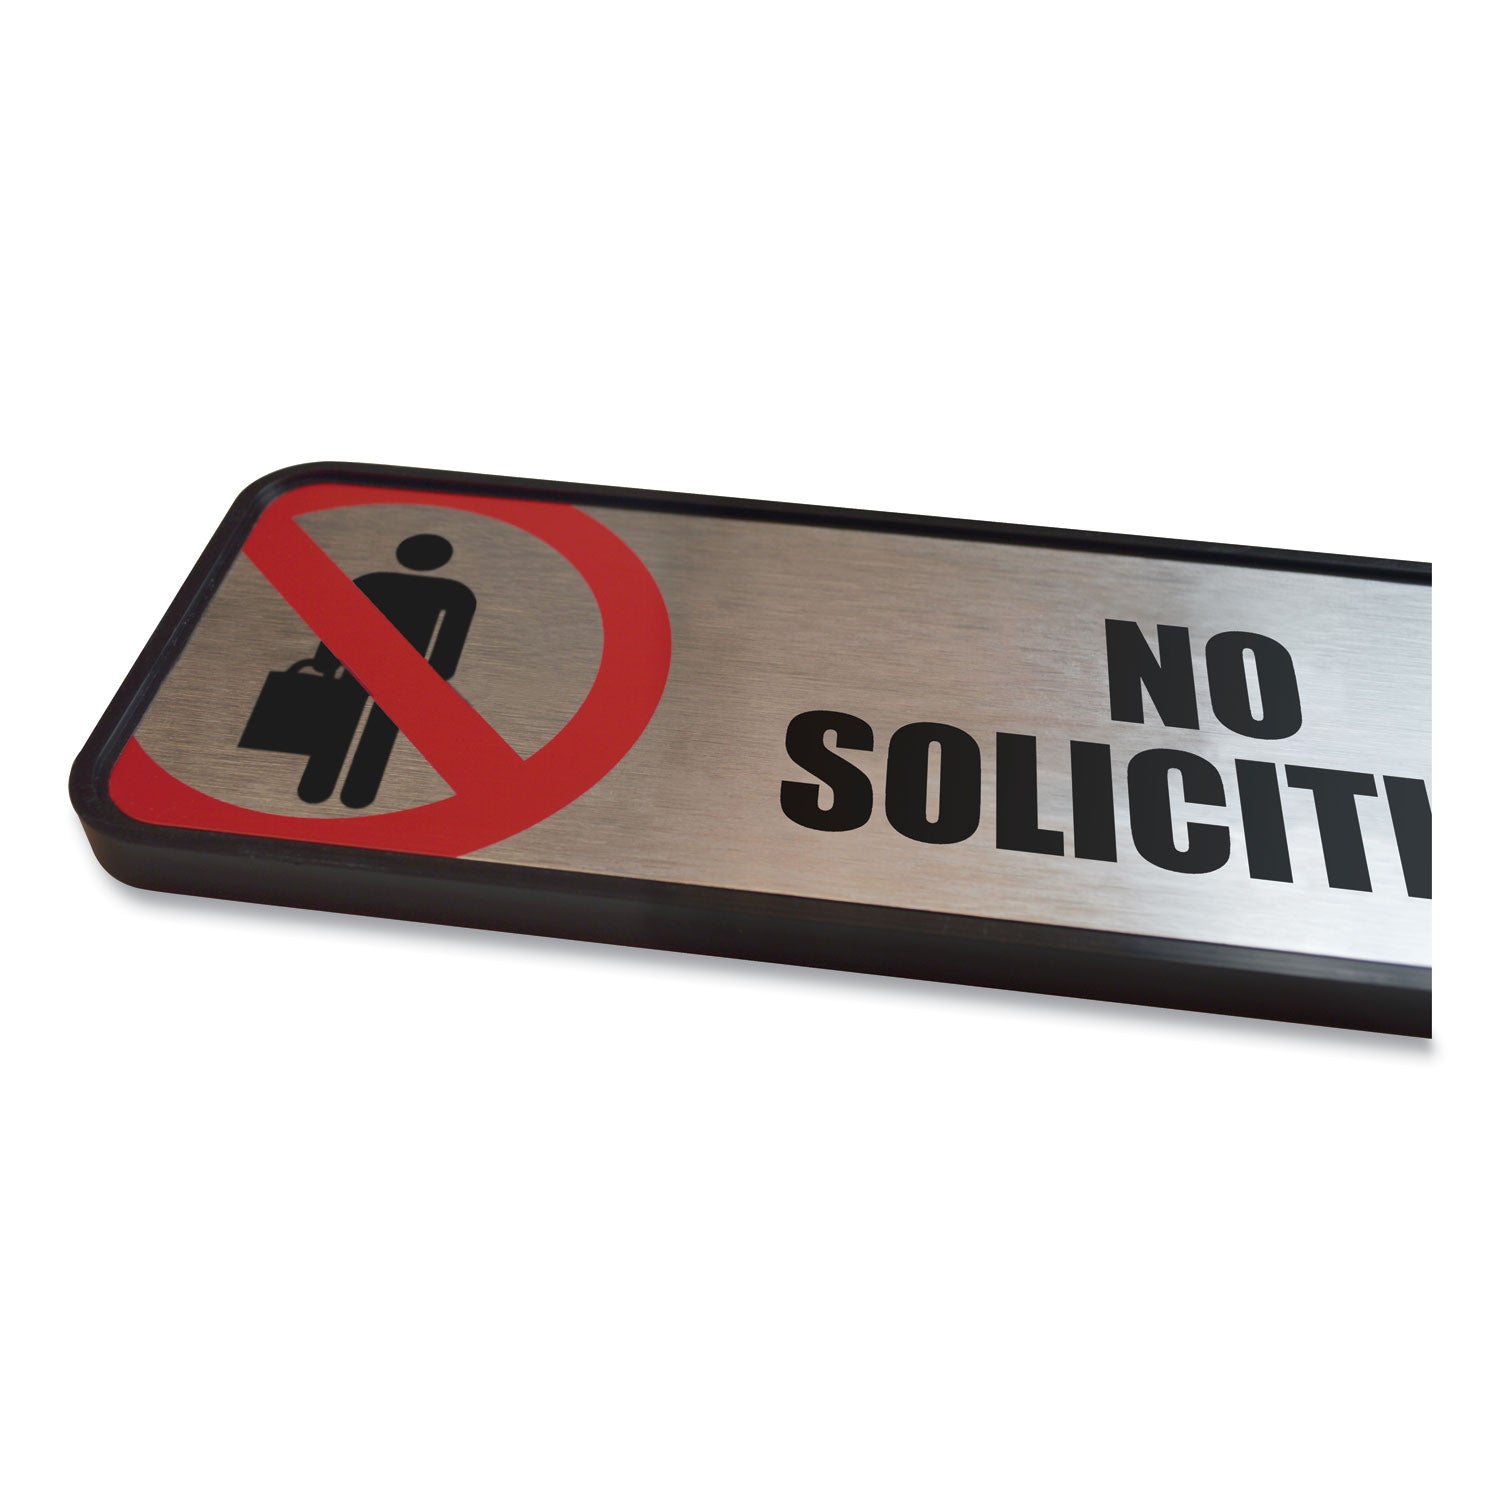 Brushed Metal Office Sign, No Soliciting, 9 x 3, Silver/Red - 